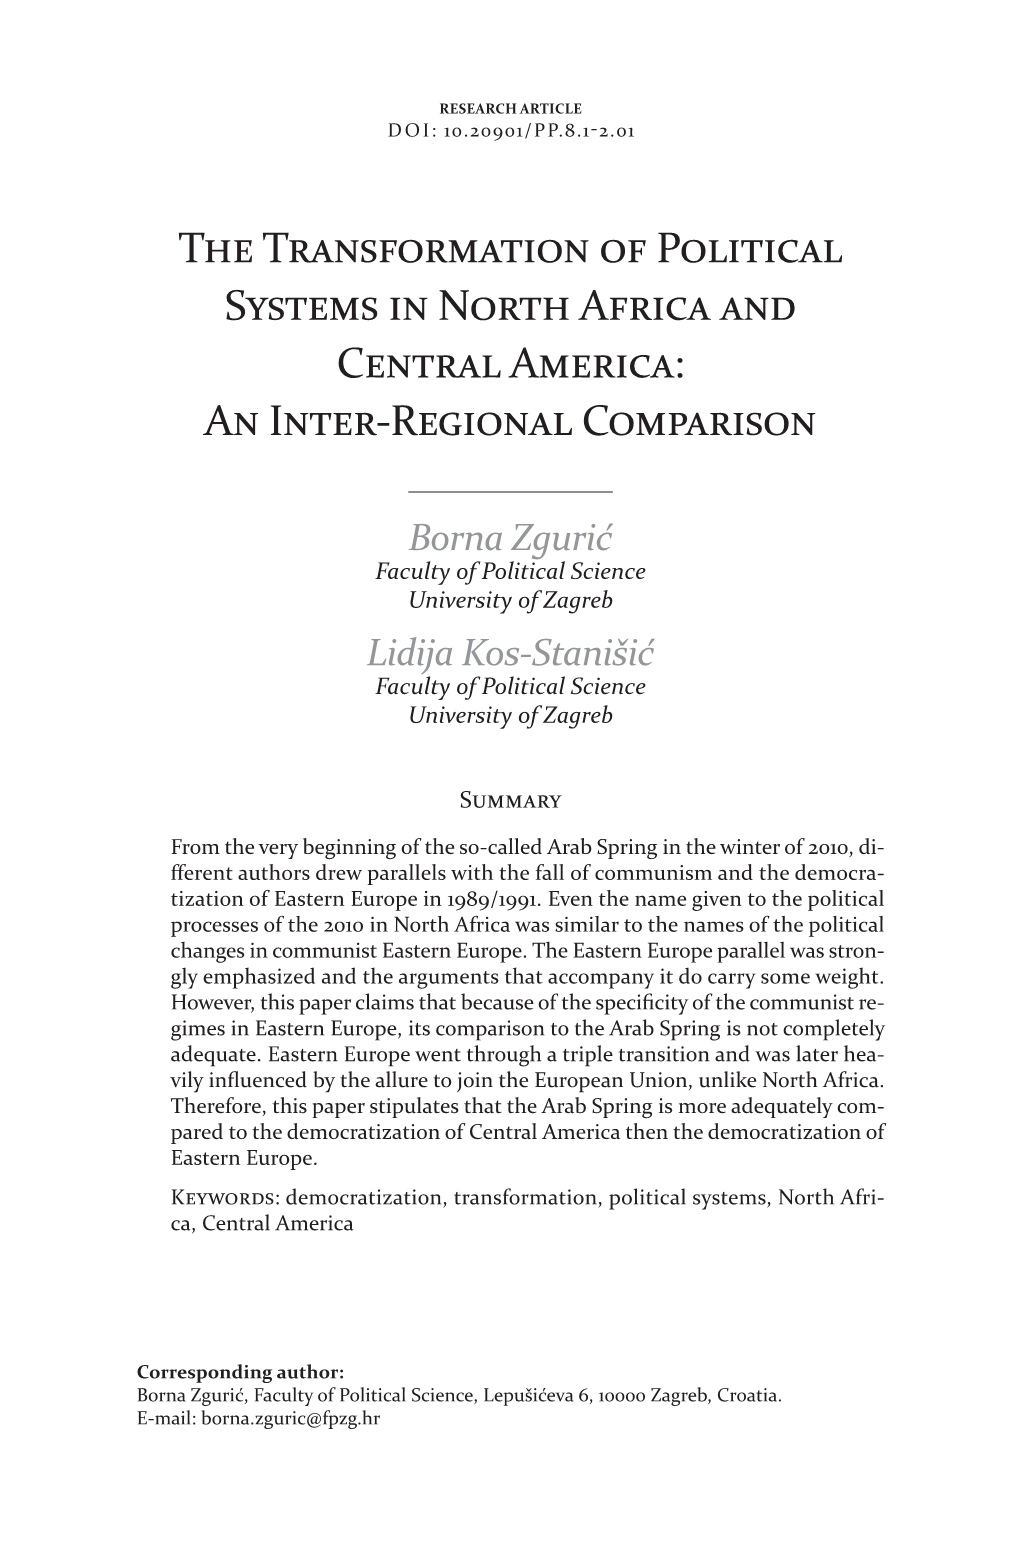 The Transformation of Political Systems in North Africa and Central America: an Inter-Regional Comparison